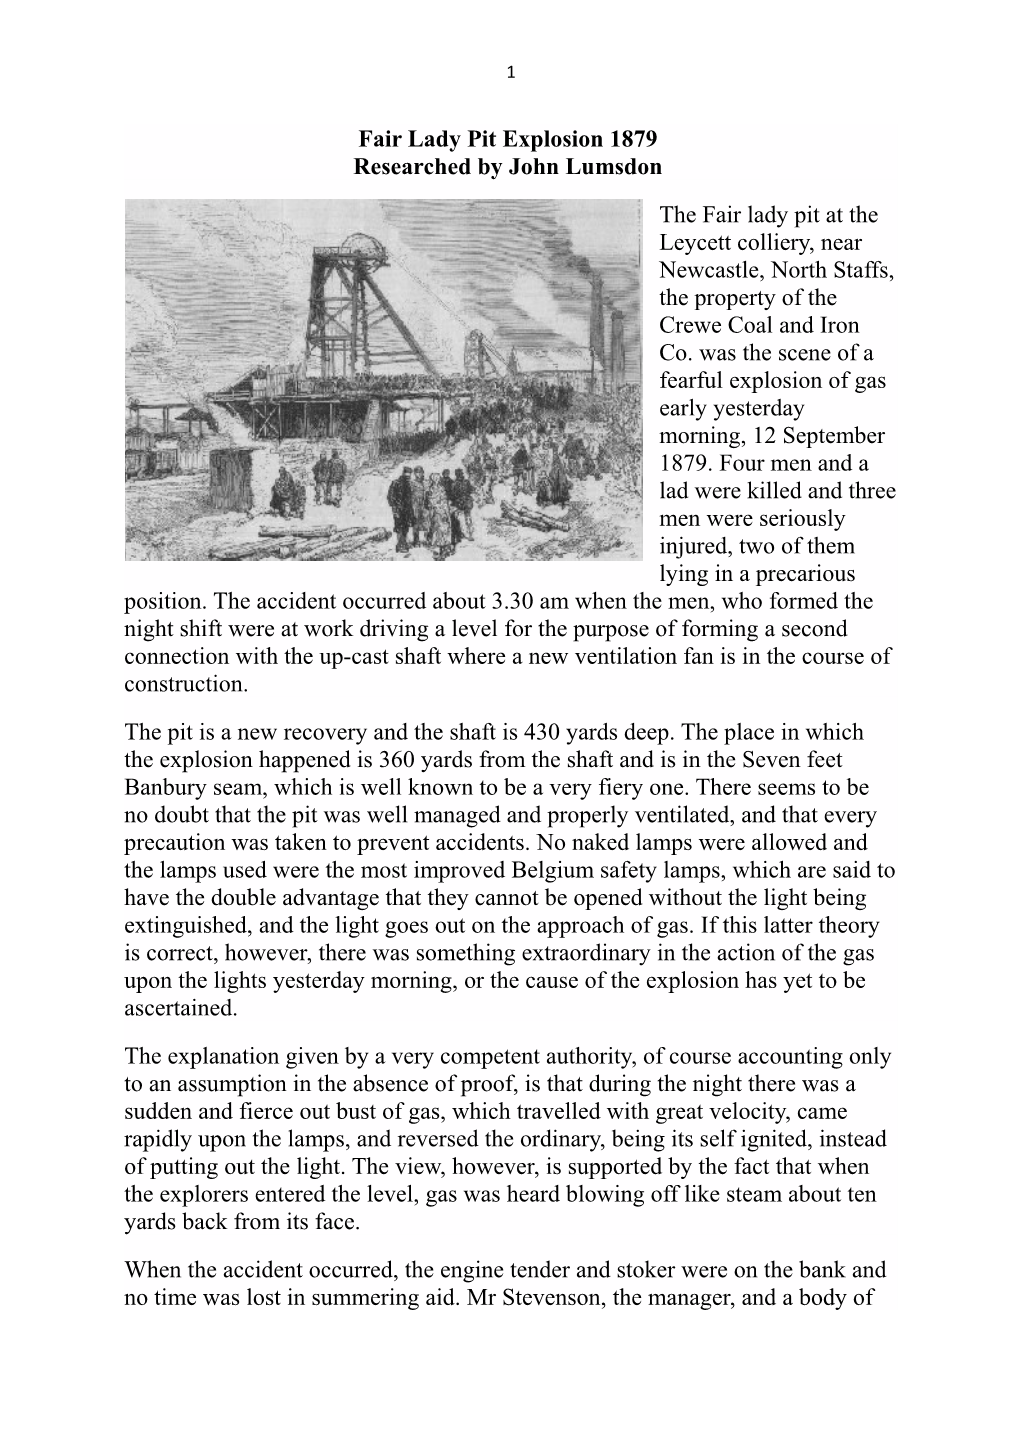 Fair Lady Pit Explosion 1879 Researched by John Lumsdon